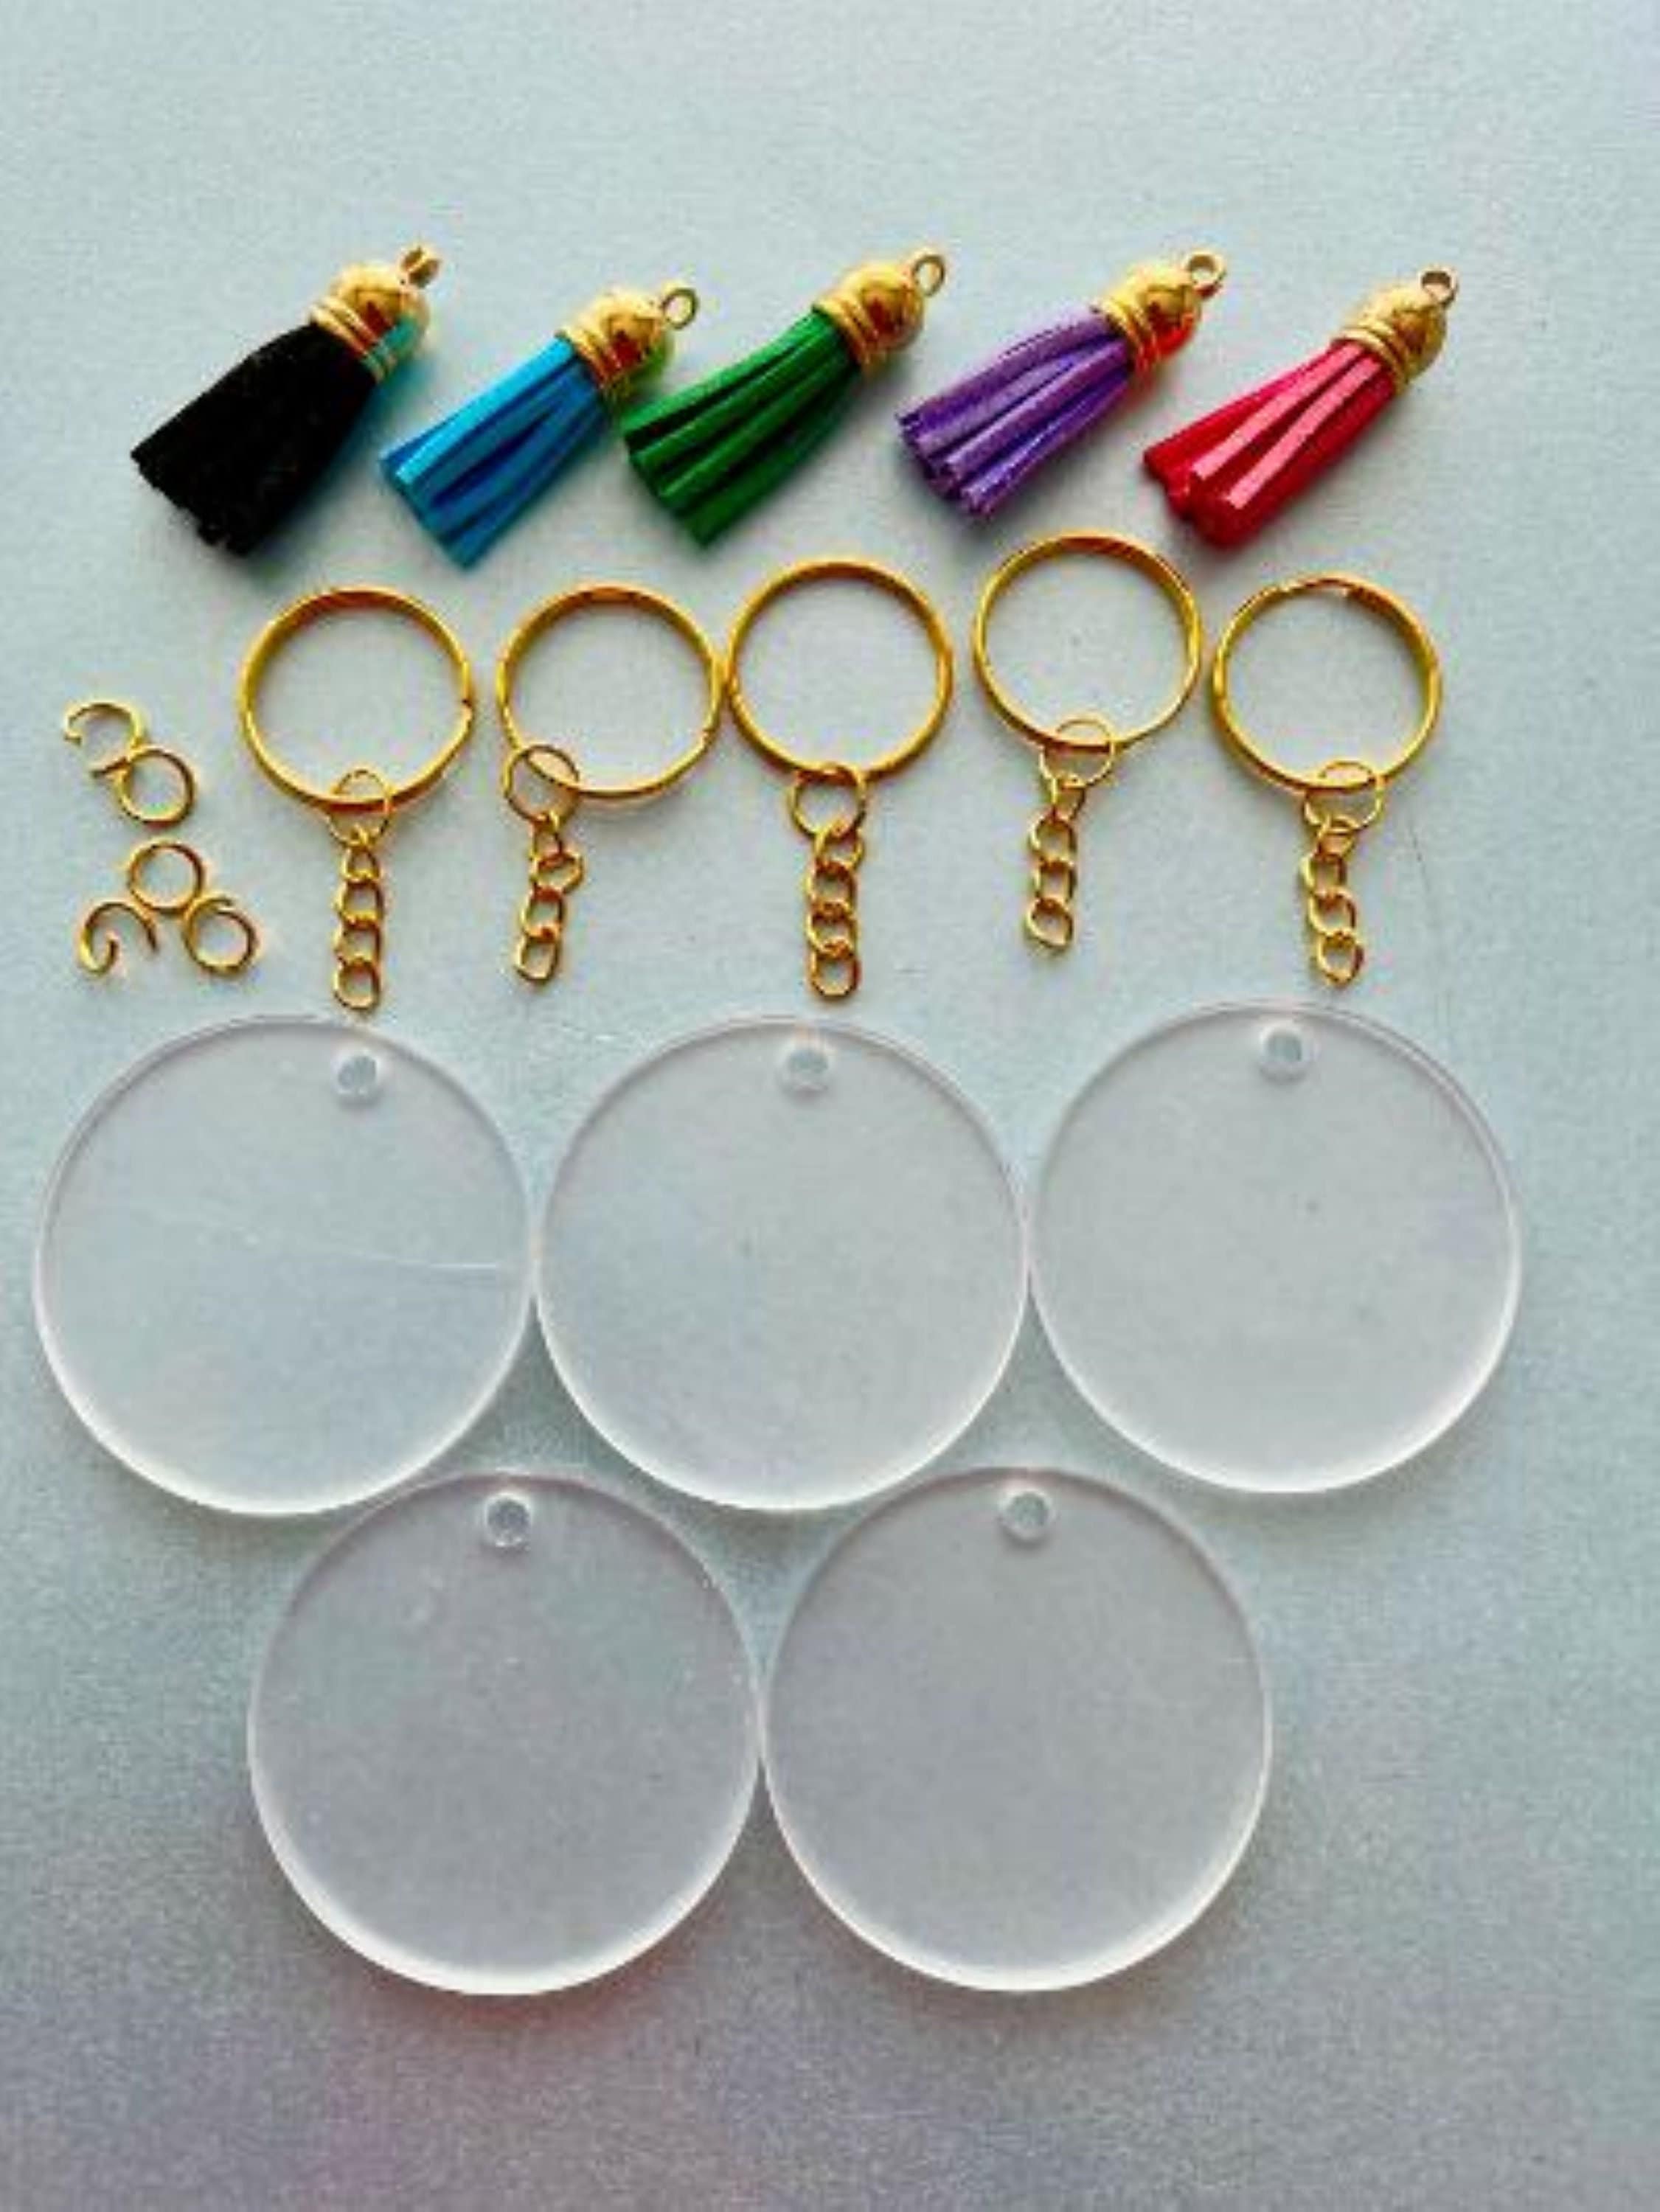 Duufin 40 Pieces Acrylic Keychain Blanks Transparent Acrylic Circles Disc Ornaments Blanks with Hole for DIY Keychain and Craft Project 3 Inch 